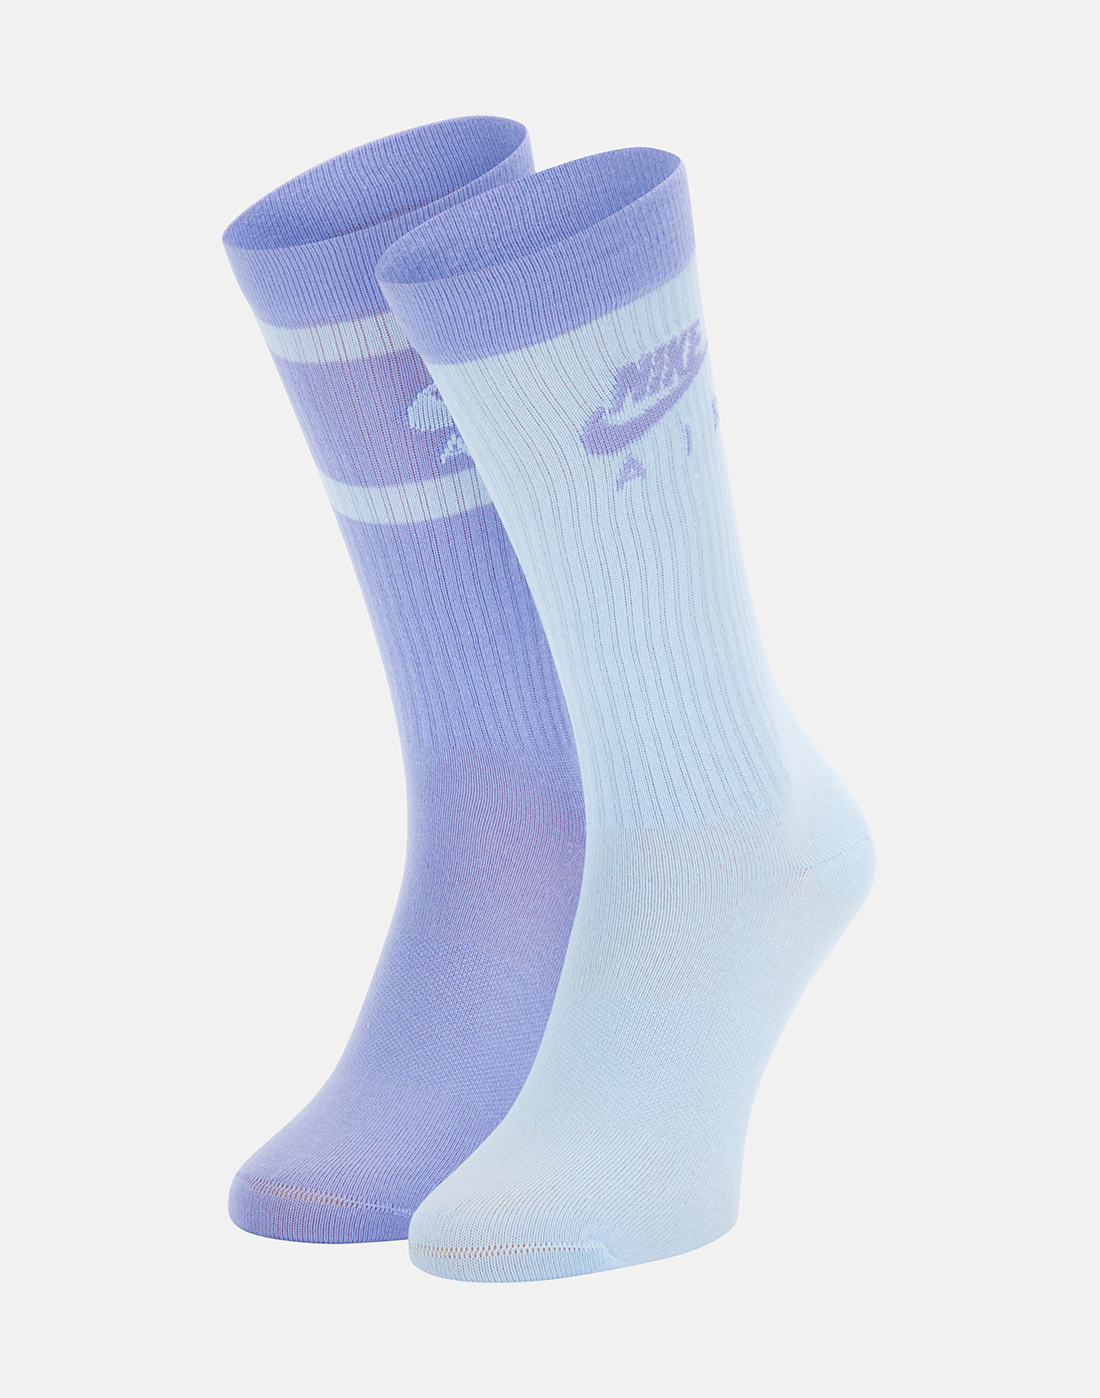 Nike Everyday Essential 2 Pack Crew Socks - Assorted | Life Style Sports UK